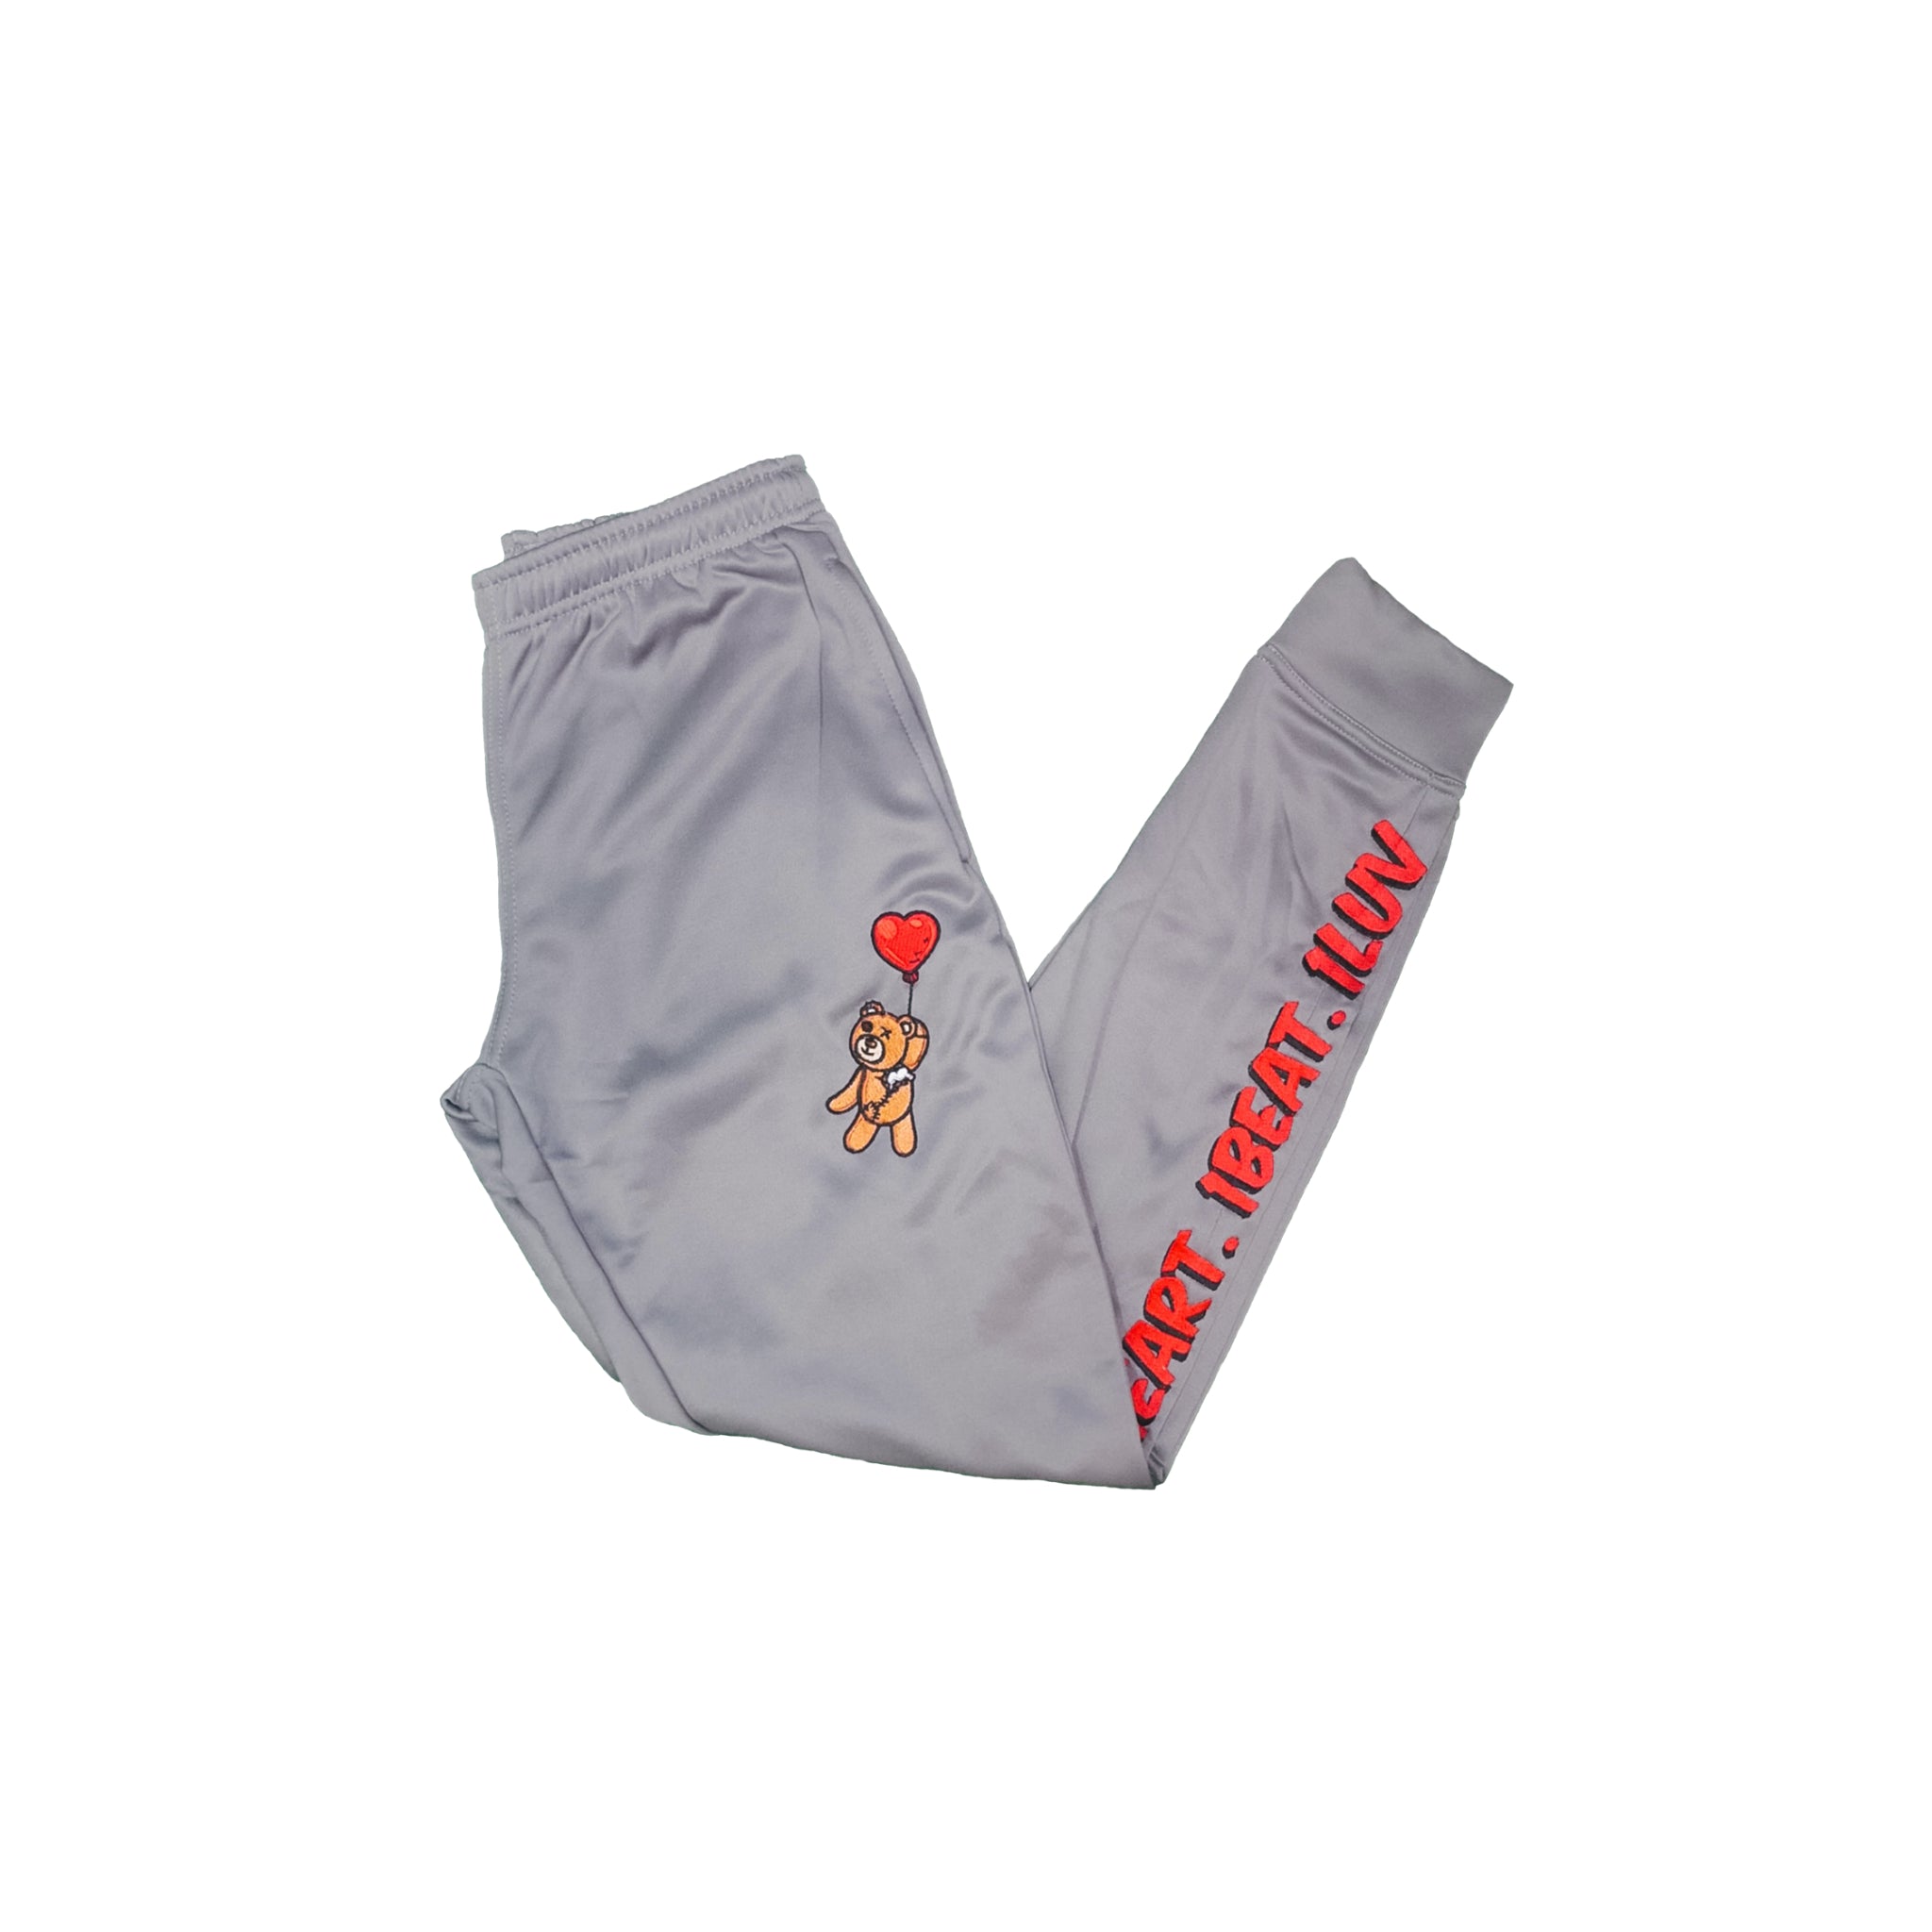 1Luv "Stealth Gray" Sweats + Track Suit (Bottoms)